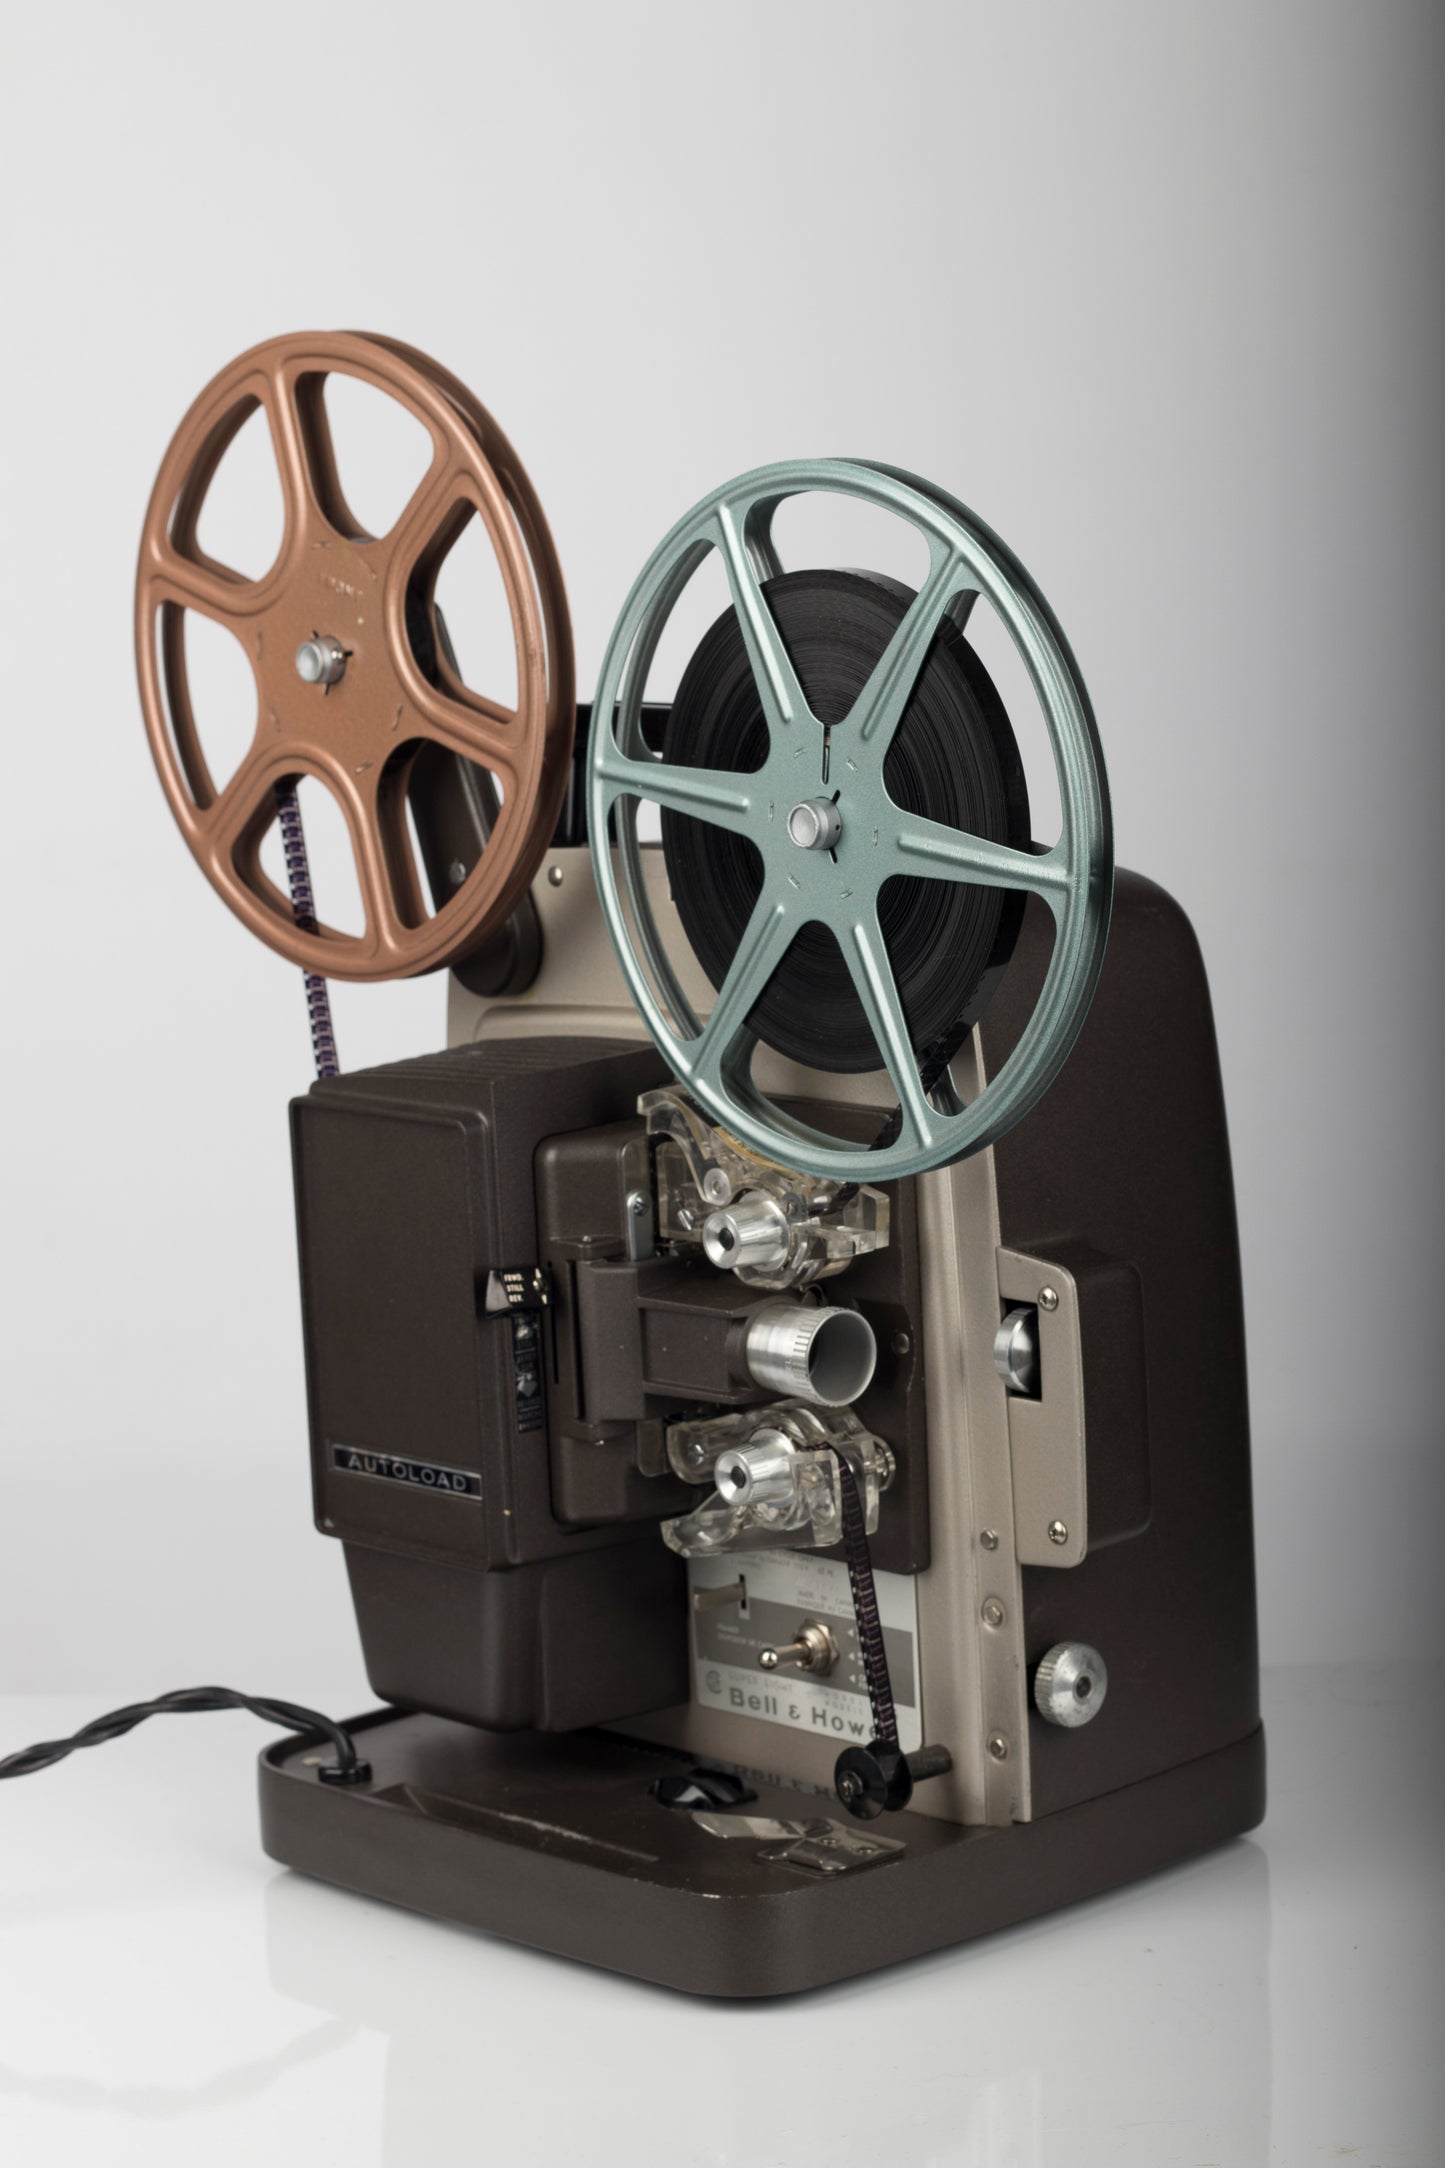 Bell and Howell 346 Super 8 movie projector